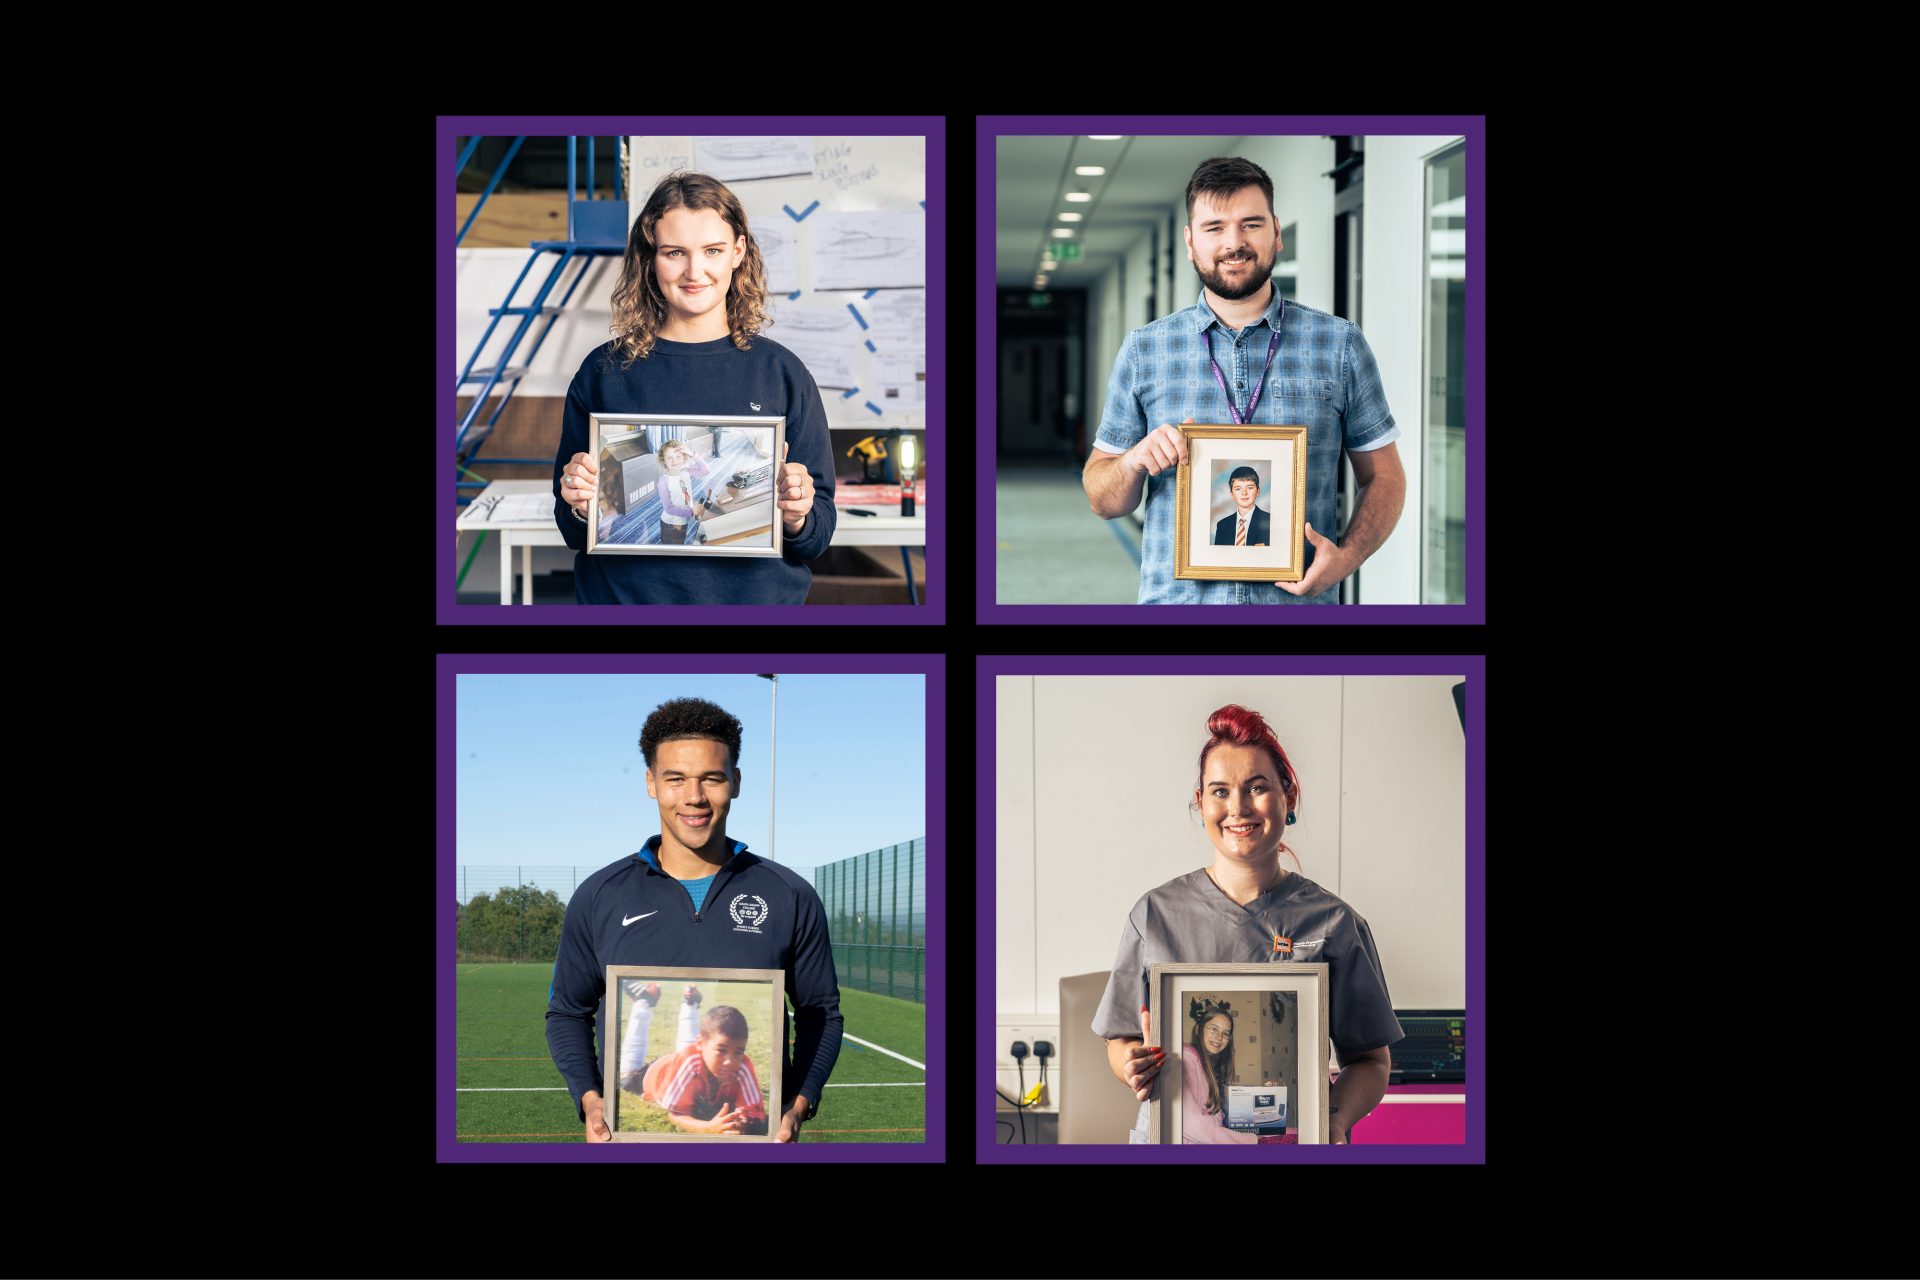 4 images of students and staff with a photo of their younger self